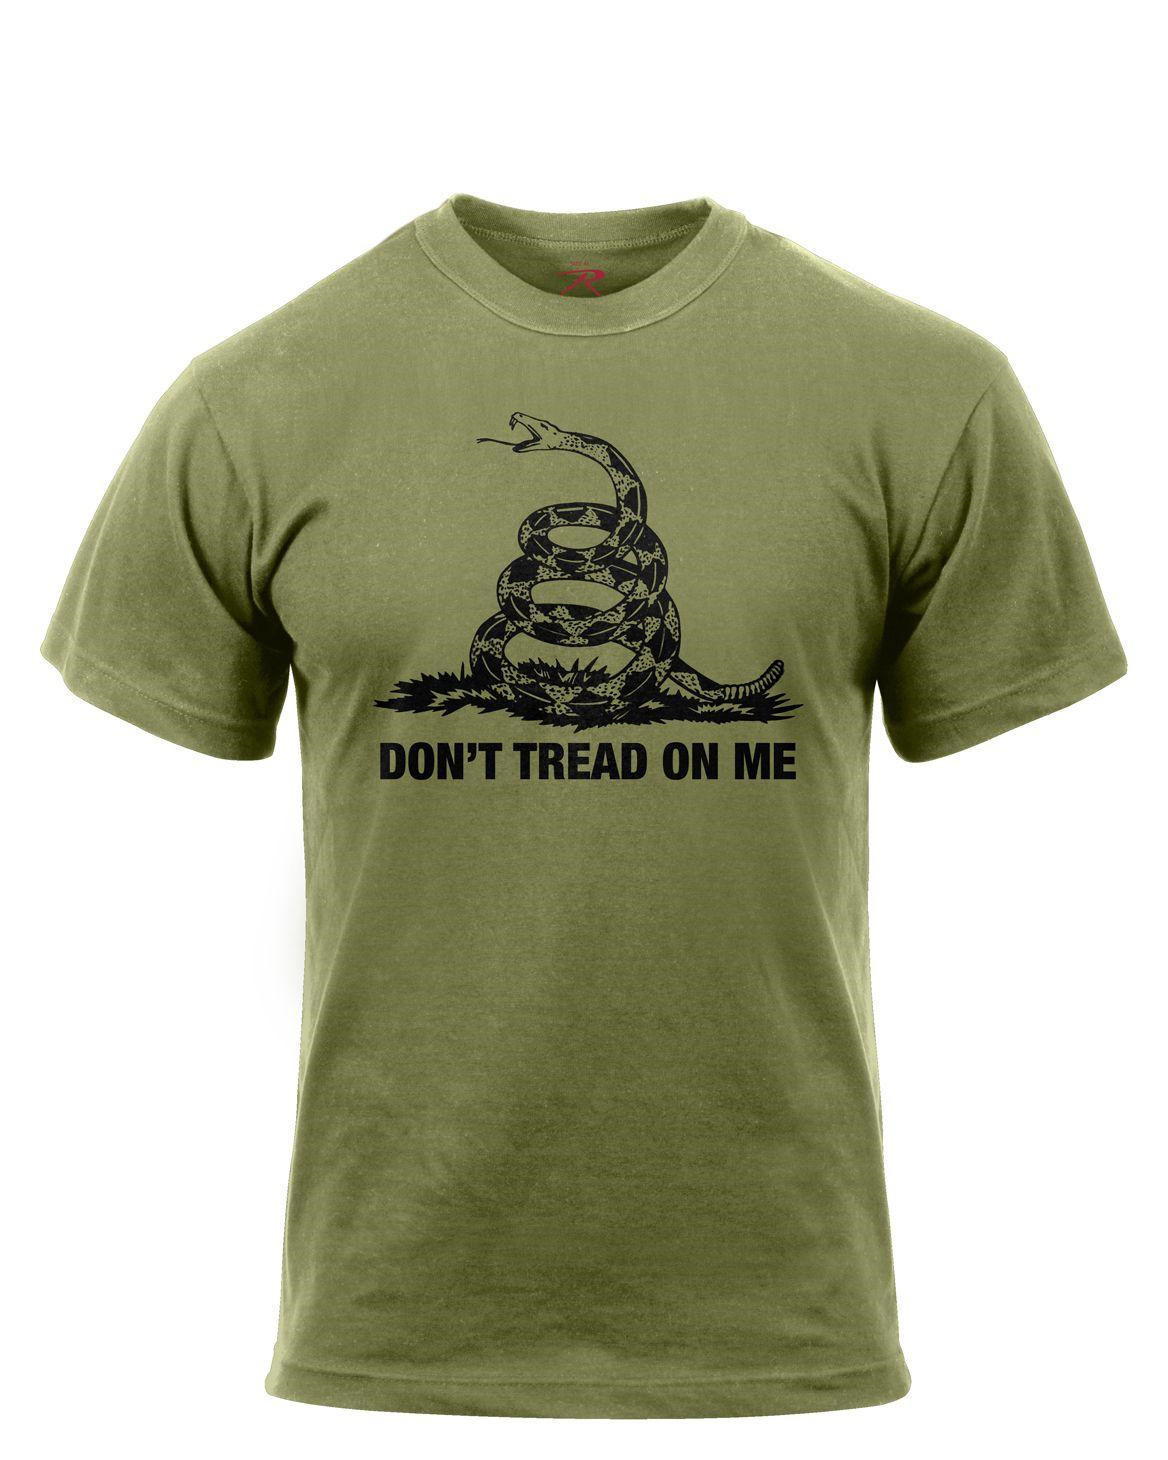 Rothco Vintage T-Shirt - 'Don't Tread On Me' (Oliven, XL)